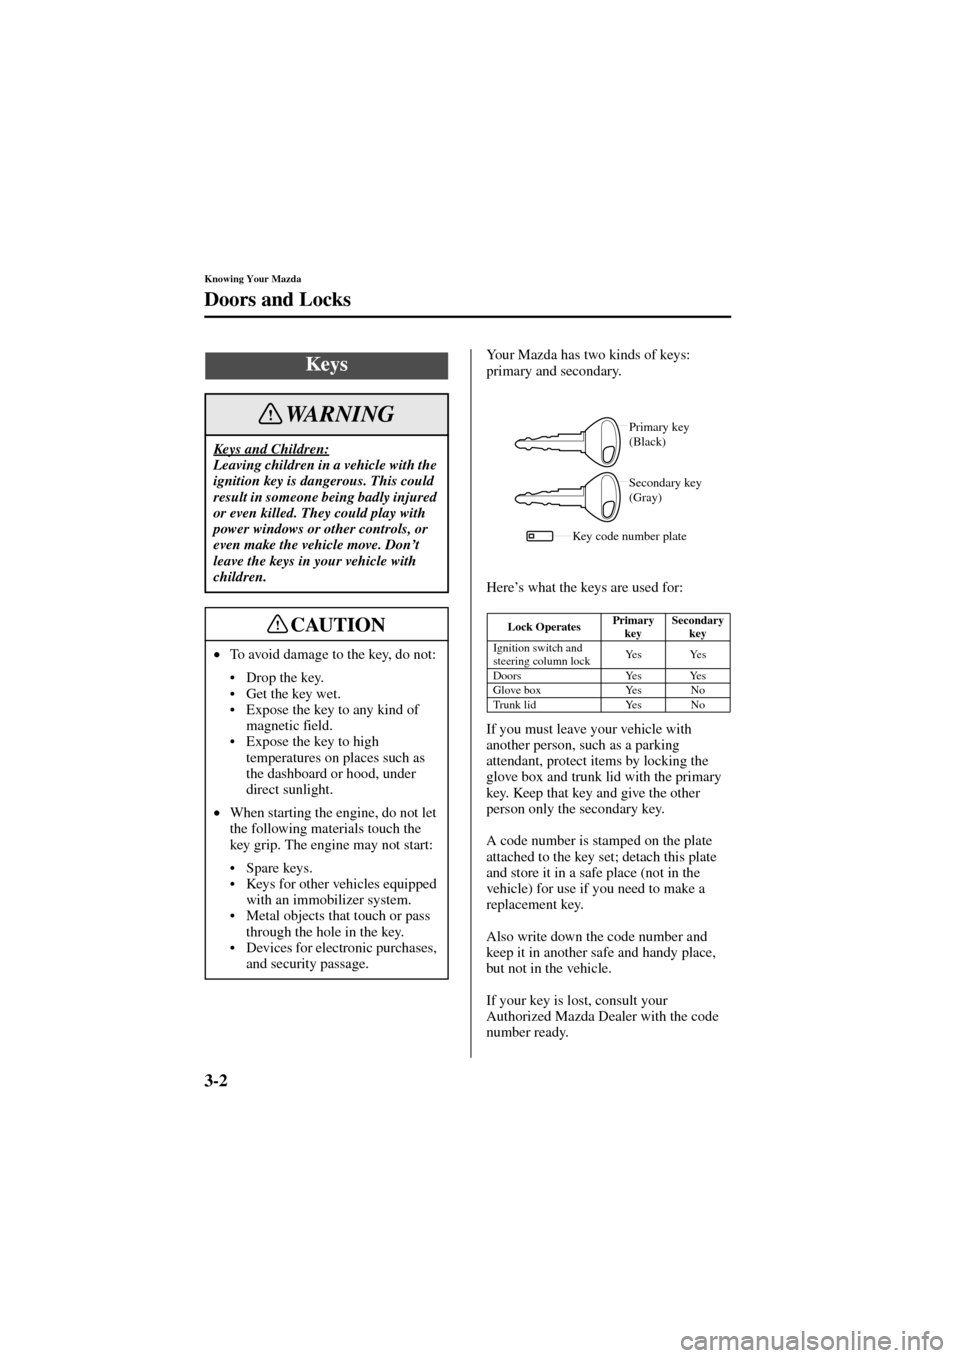 MAZDA MODEL 6 2004  Owners Manual (in English) 3-2
Knowing Your Mazda
Form No. 8R29-EA-02I
Doors and Locks
Your Mazda has two kinds of keys: 
primary and secondary.
Here’s what the keys are used for:
If you must leave your vehicle with 
another 